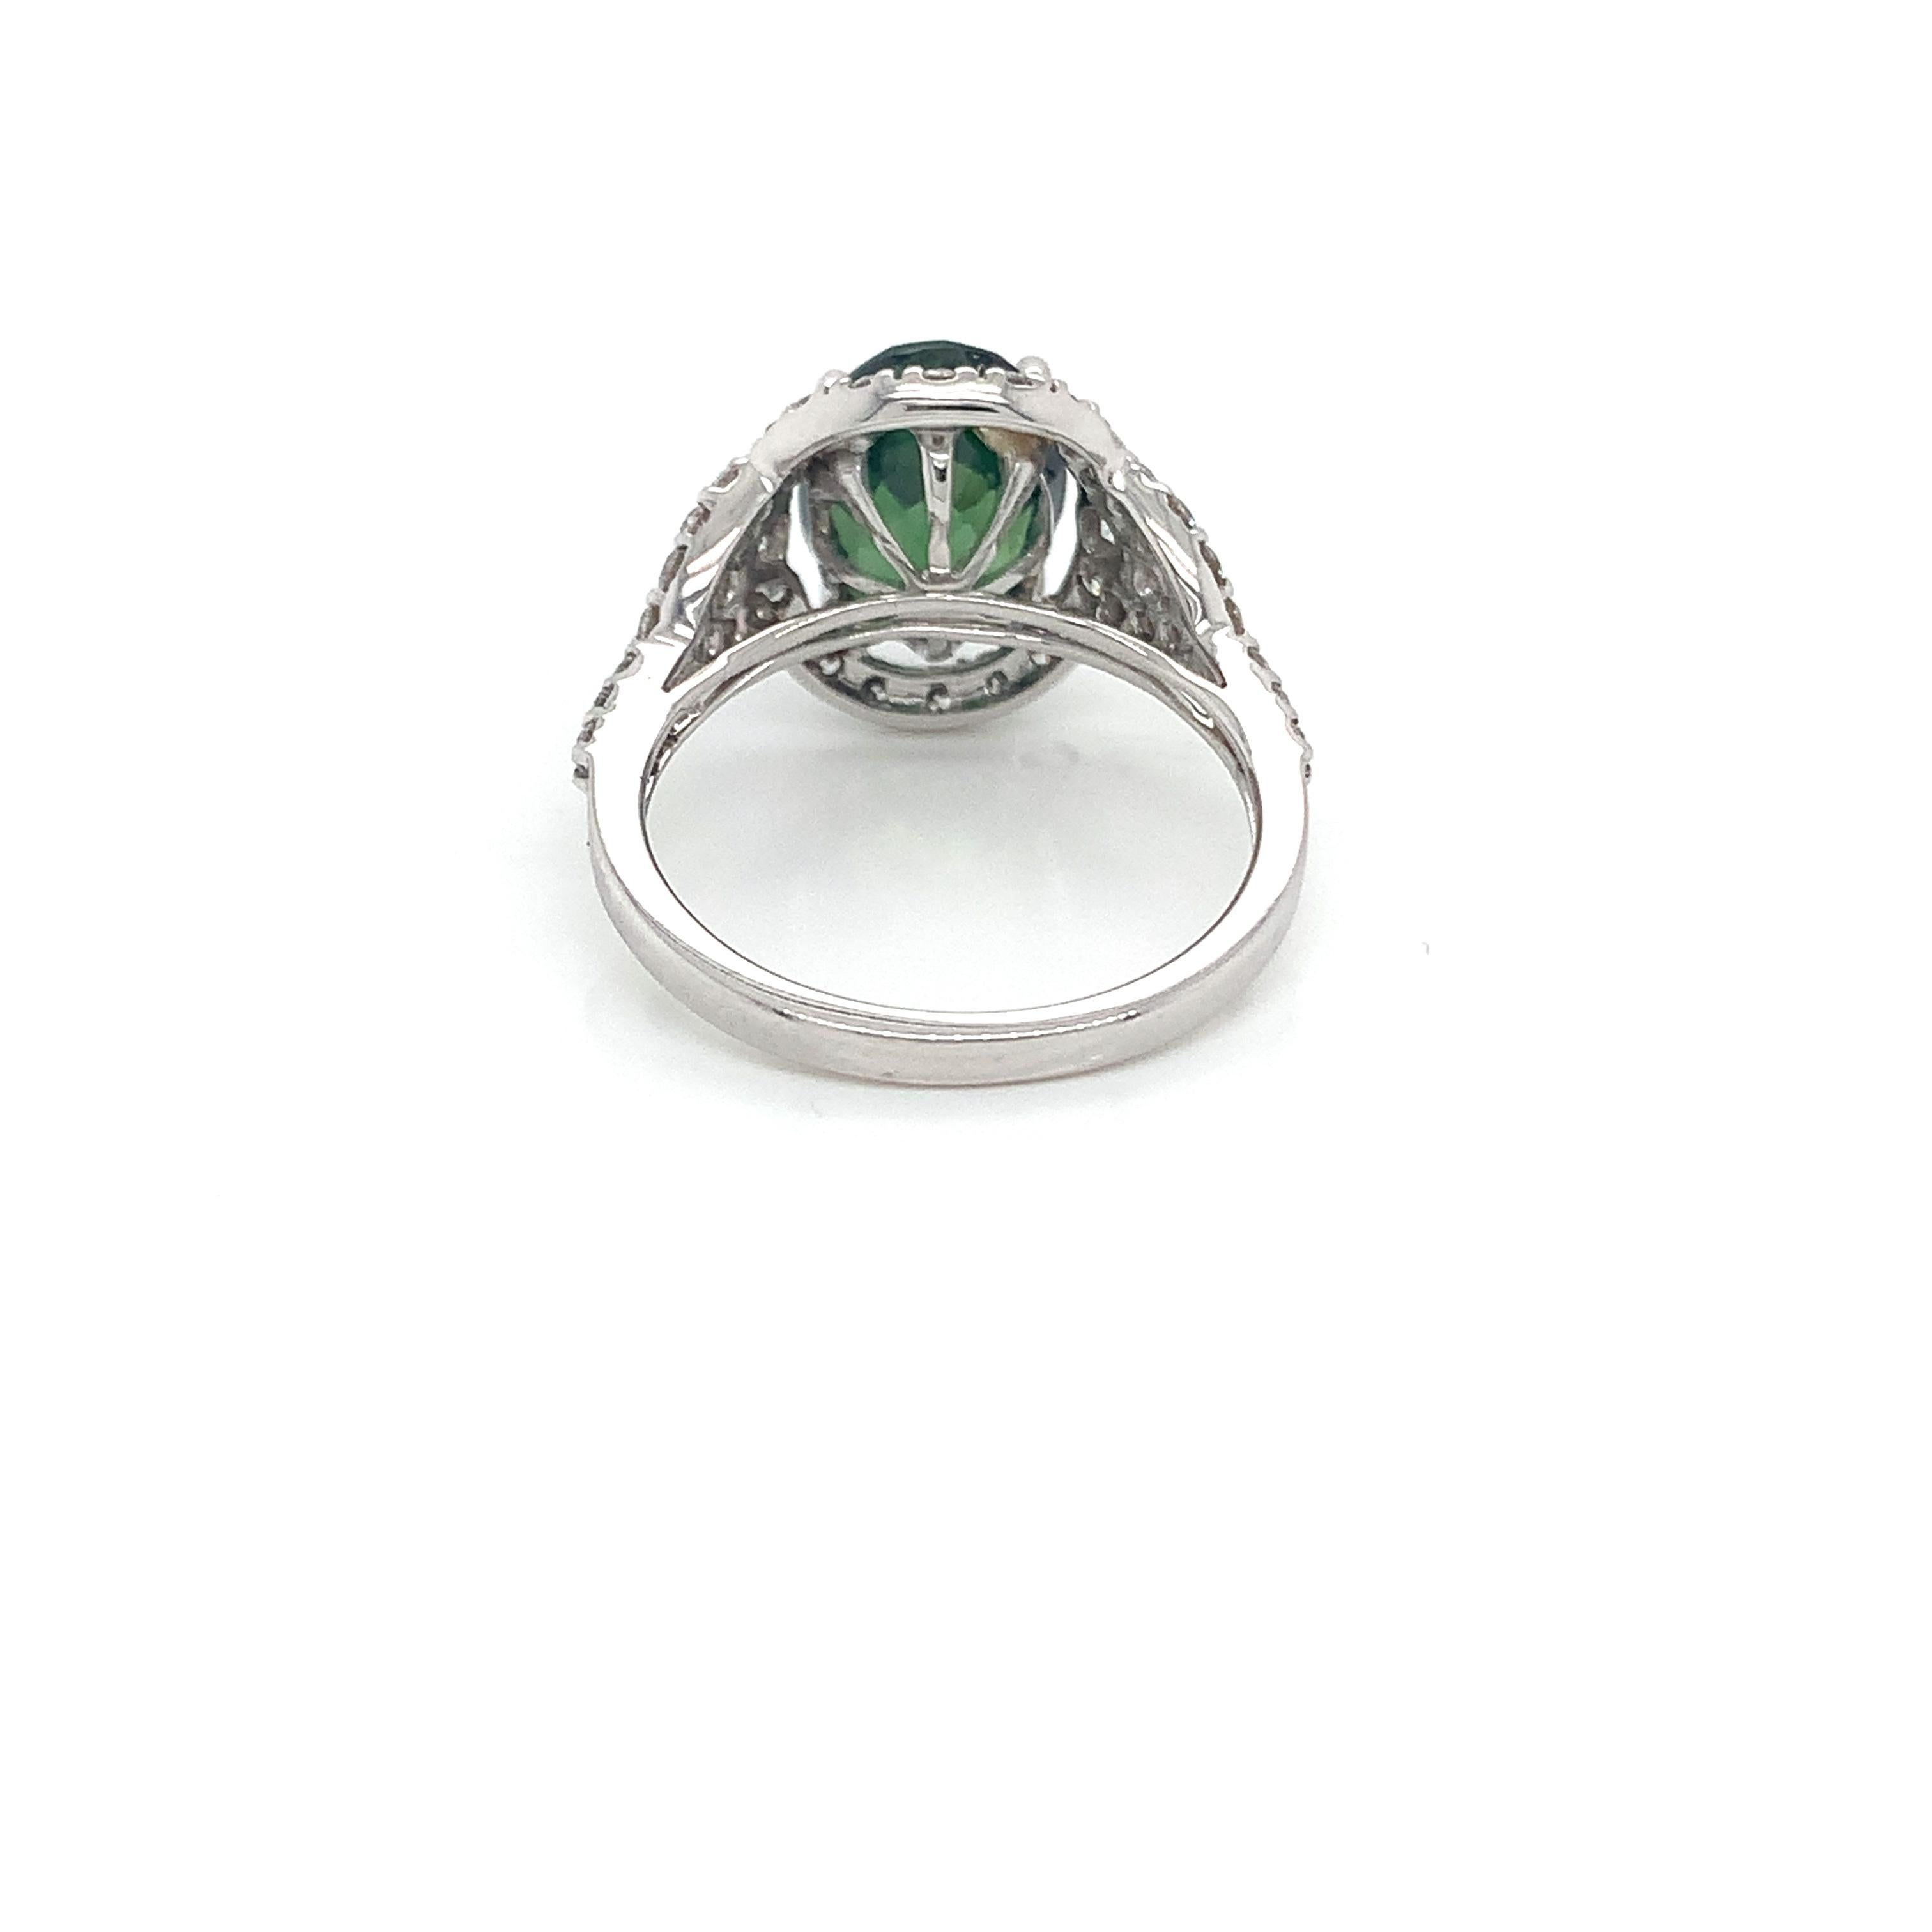 4.69 Carat Oval Green Sapphire & Diamond Ring in 18 Karat White Gold In New Condition For Sale In Great Neck, NY